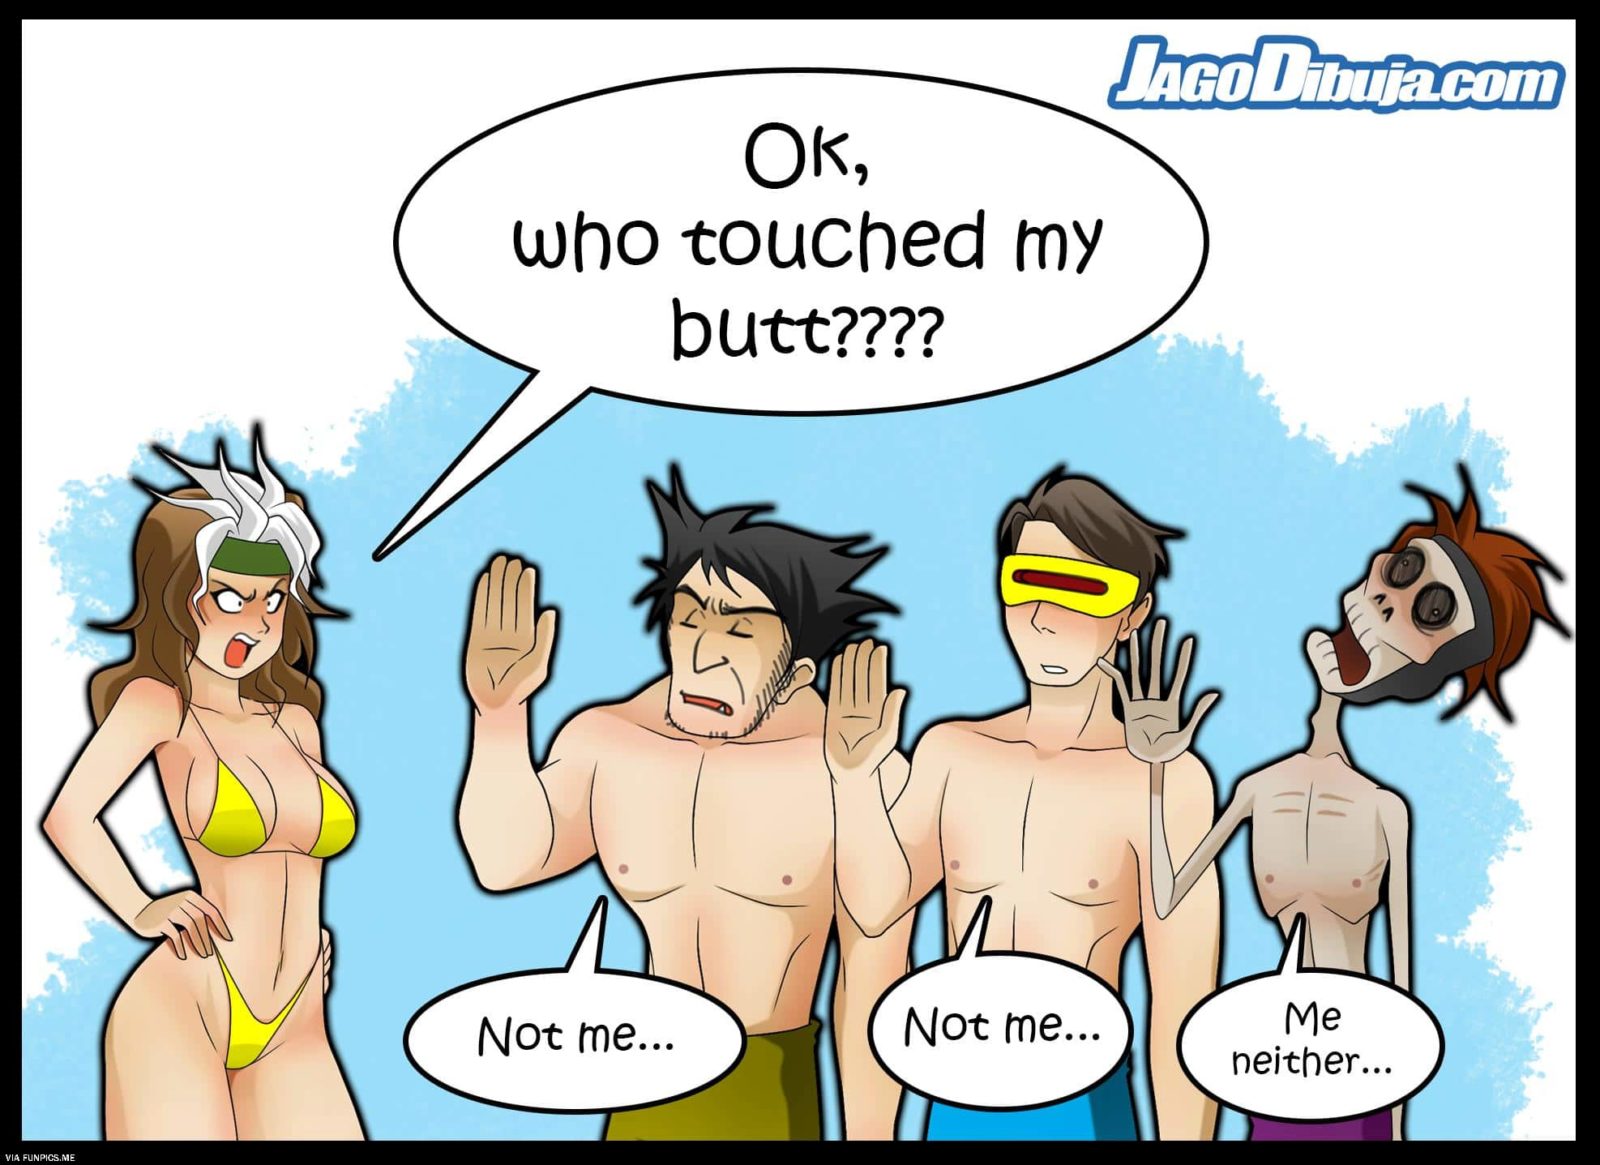 Who touched Rogue’s butt